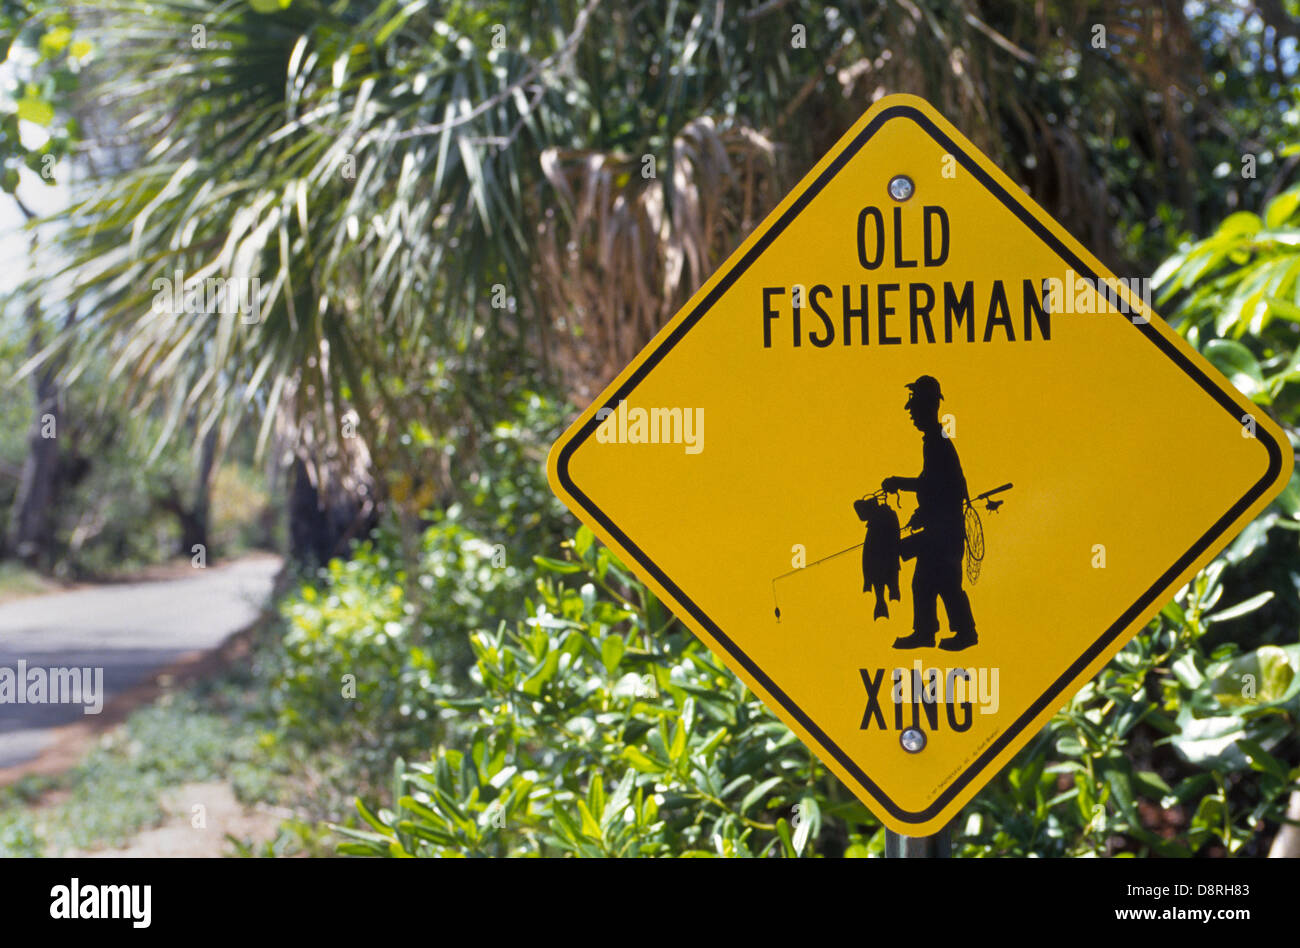 A traffic sign warns of a road crossing for old folks who like to fish, which is a popular pastime for retirees in the Sunshine State of Florida, USA. Stock Photo